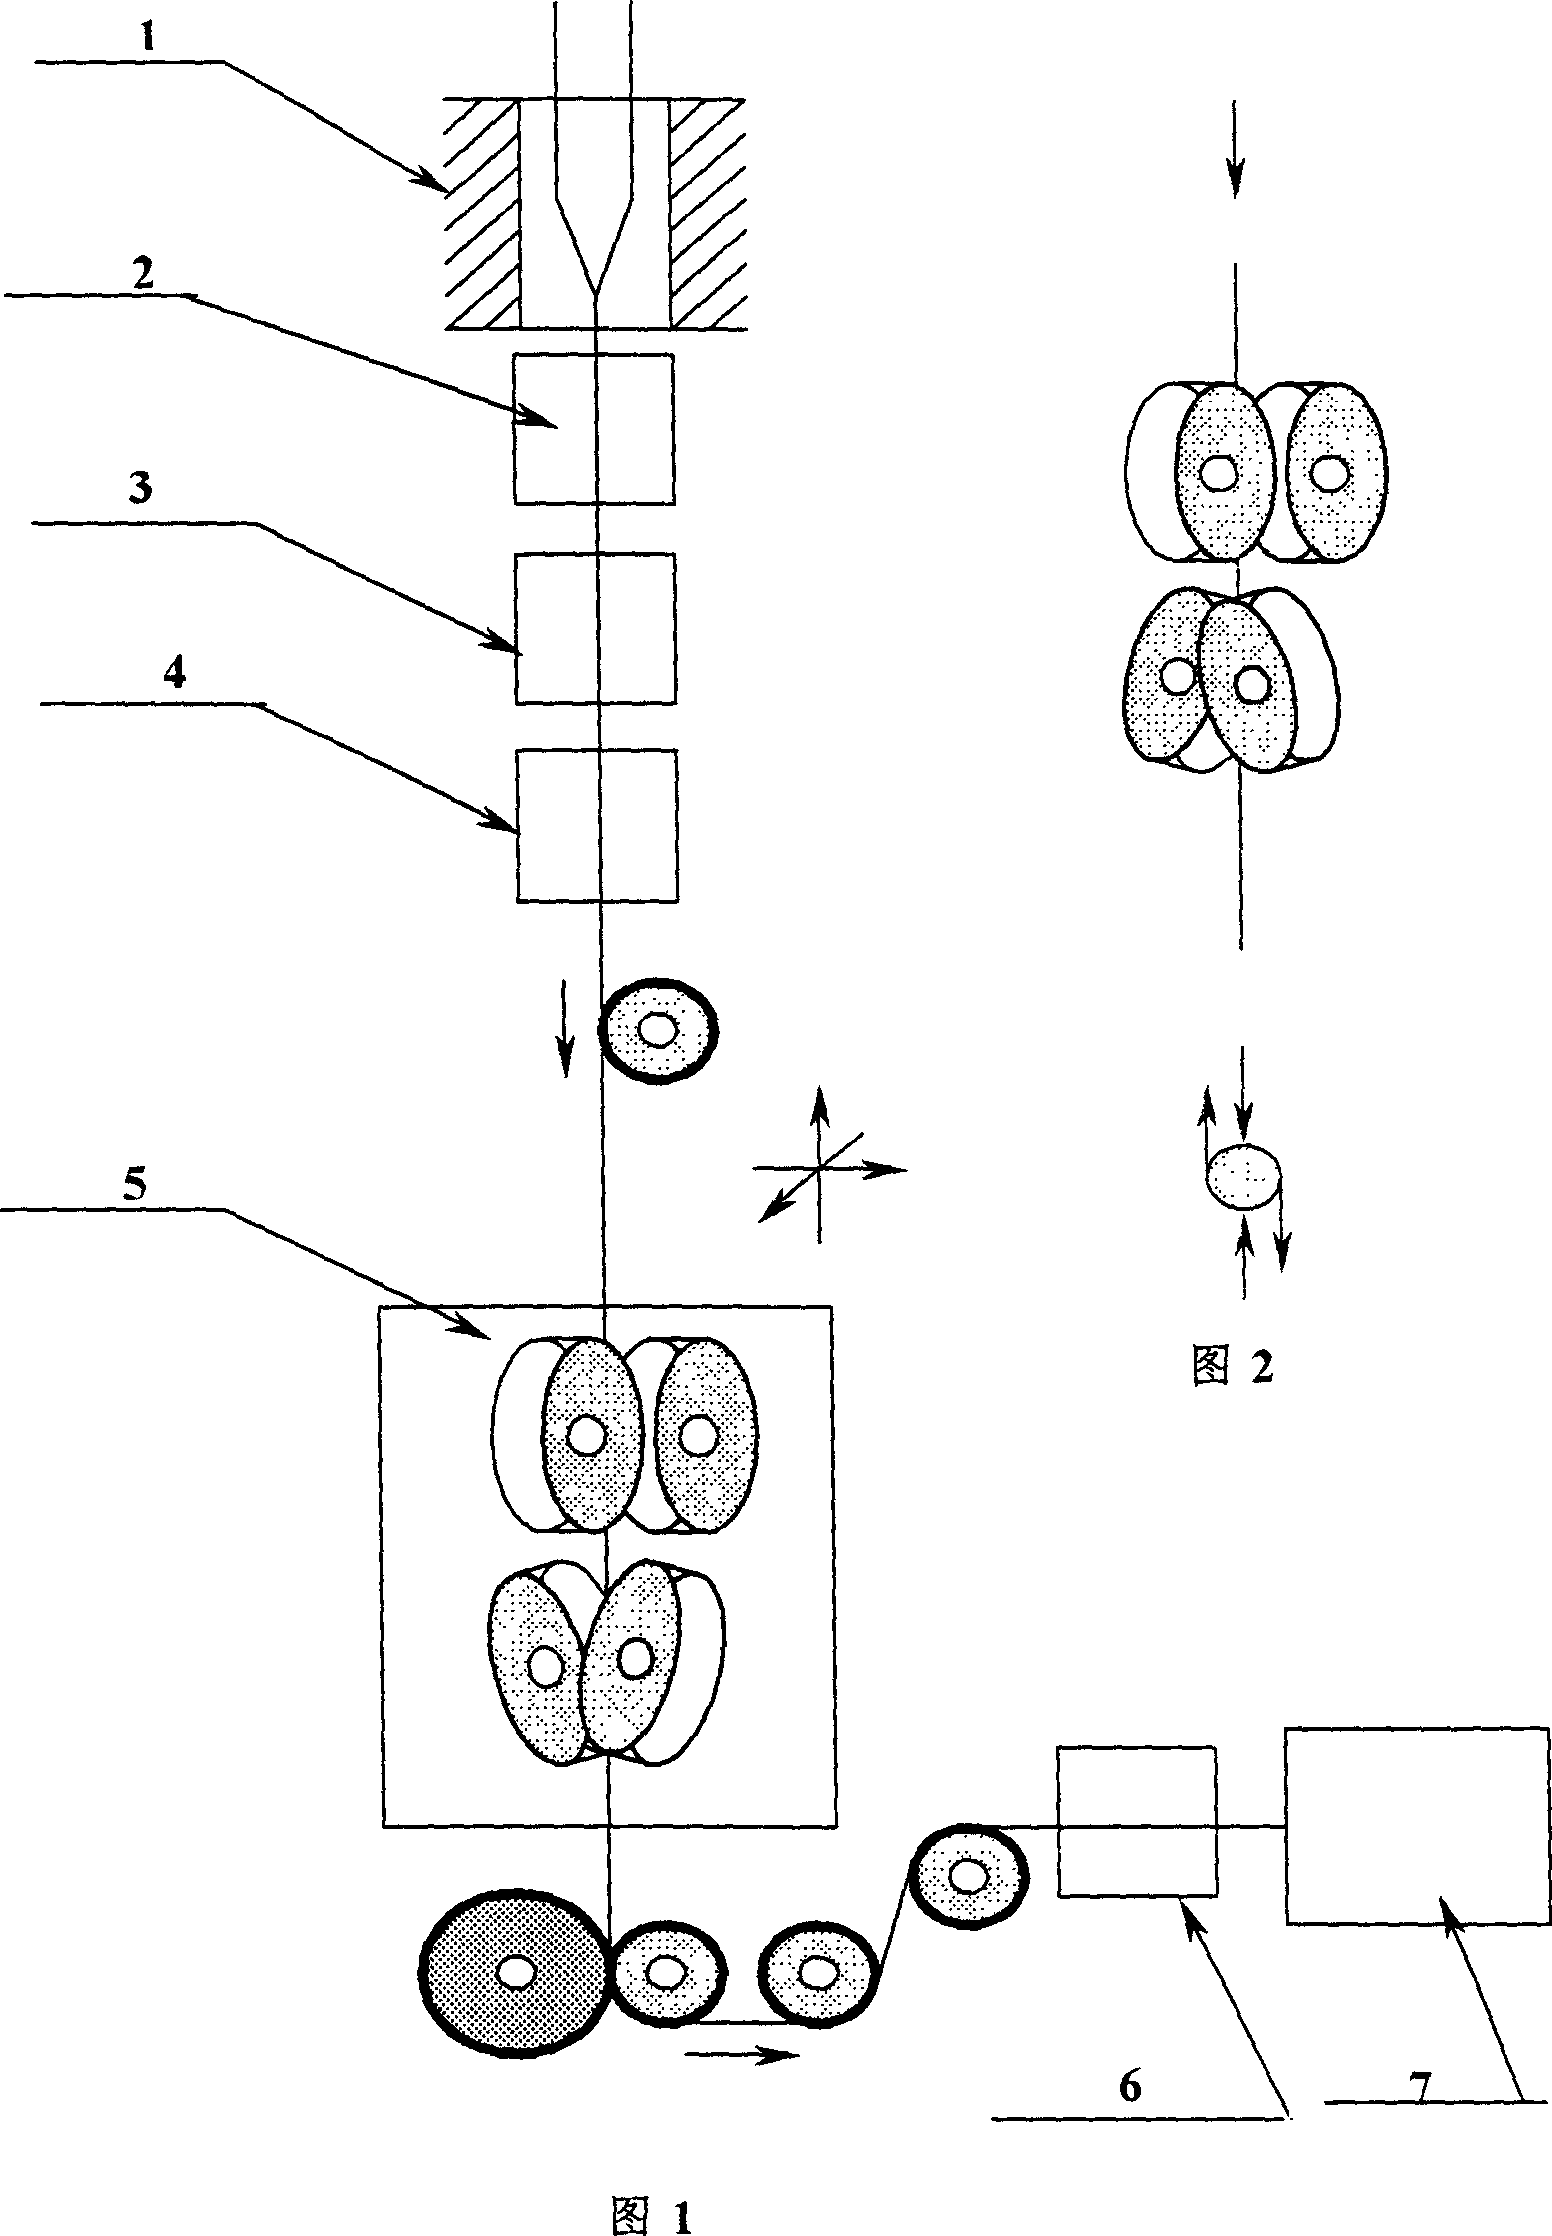 Manufacture of low polarization mode dispersion single mode optical fibers and products thereby